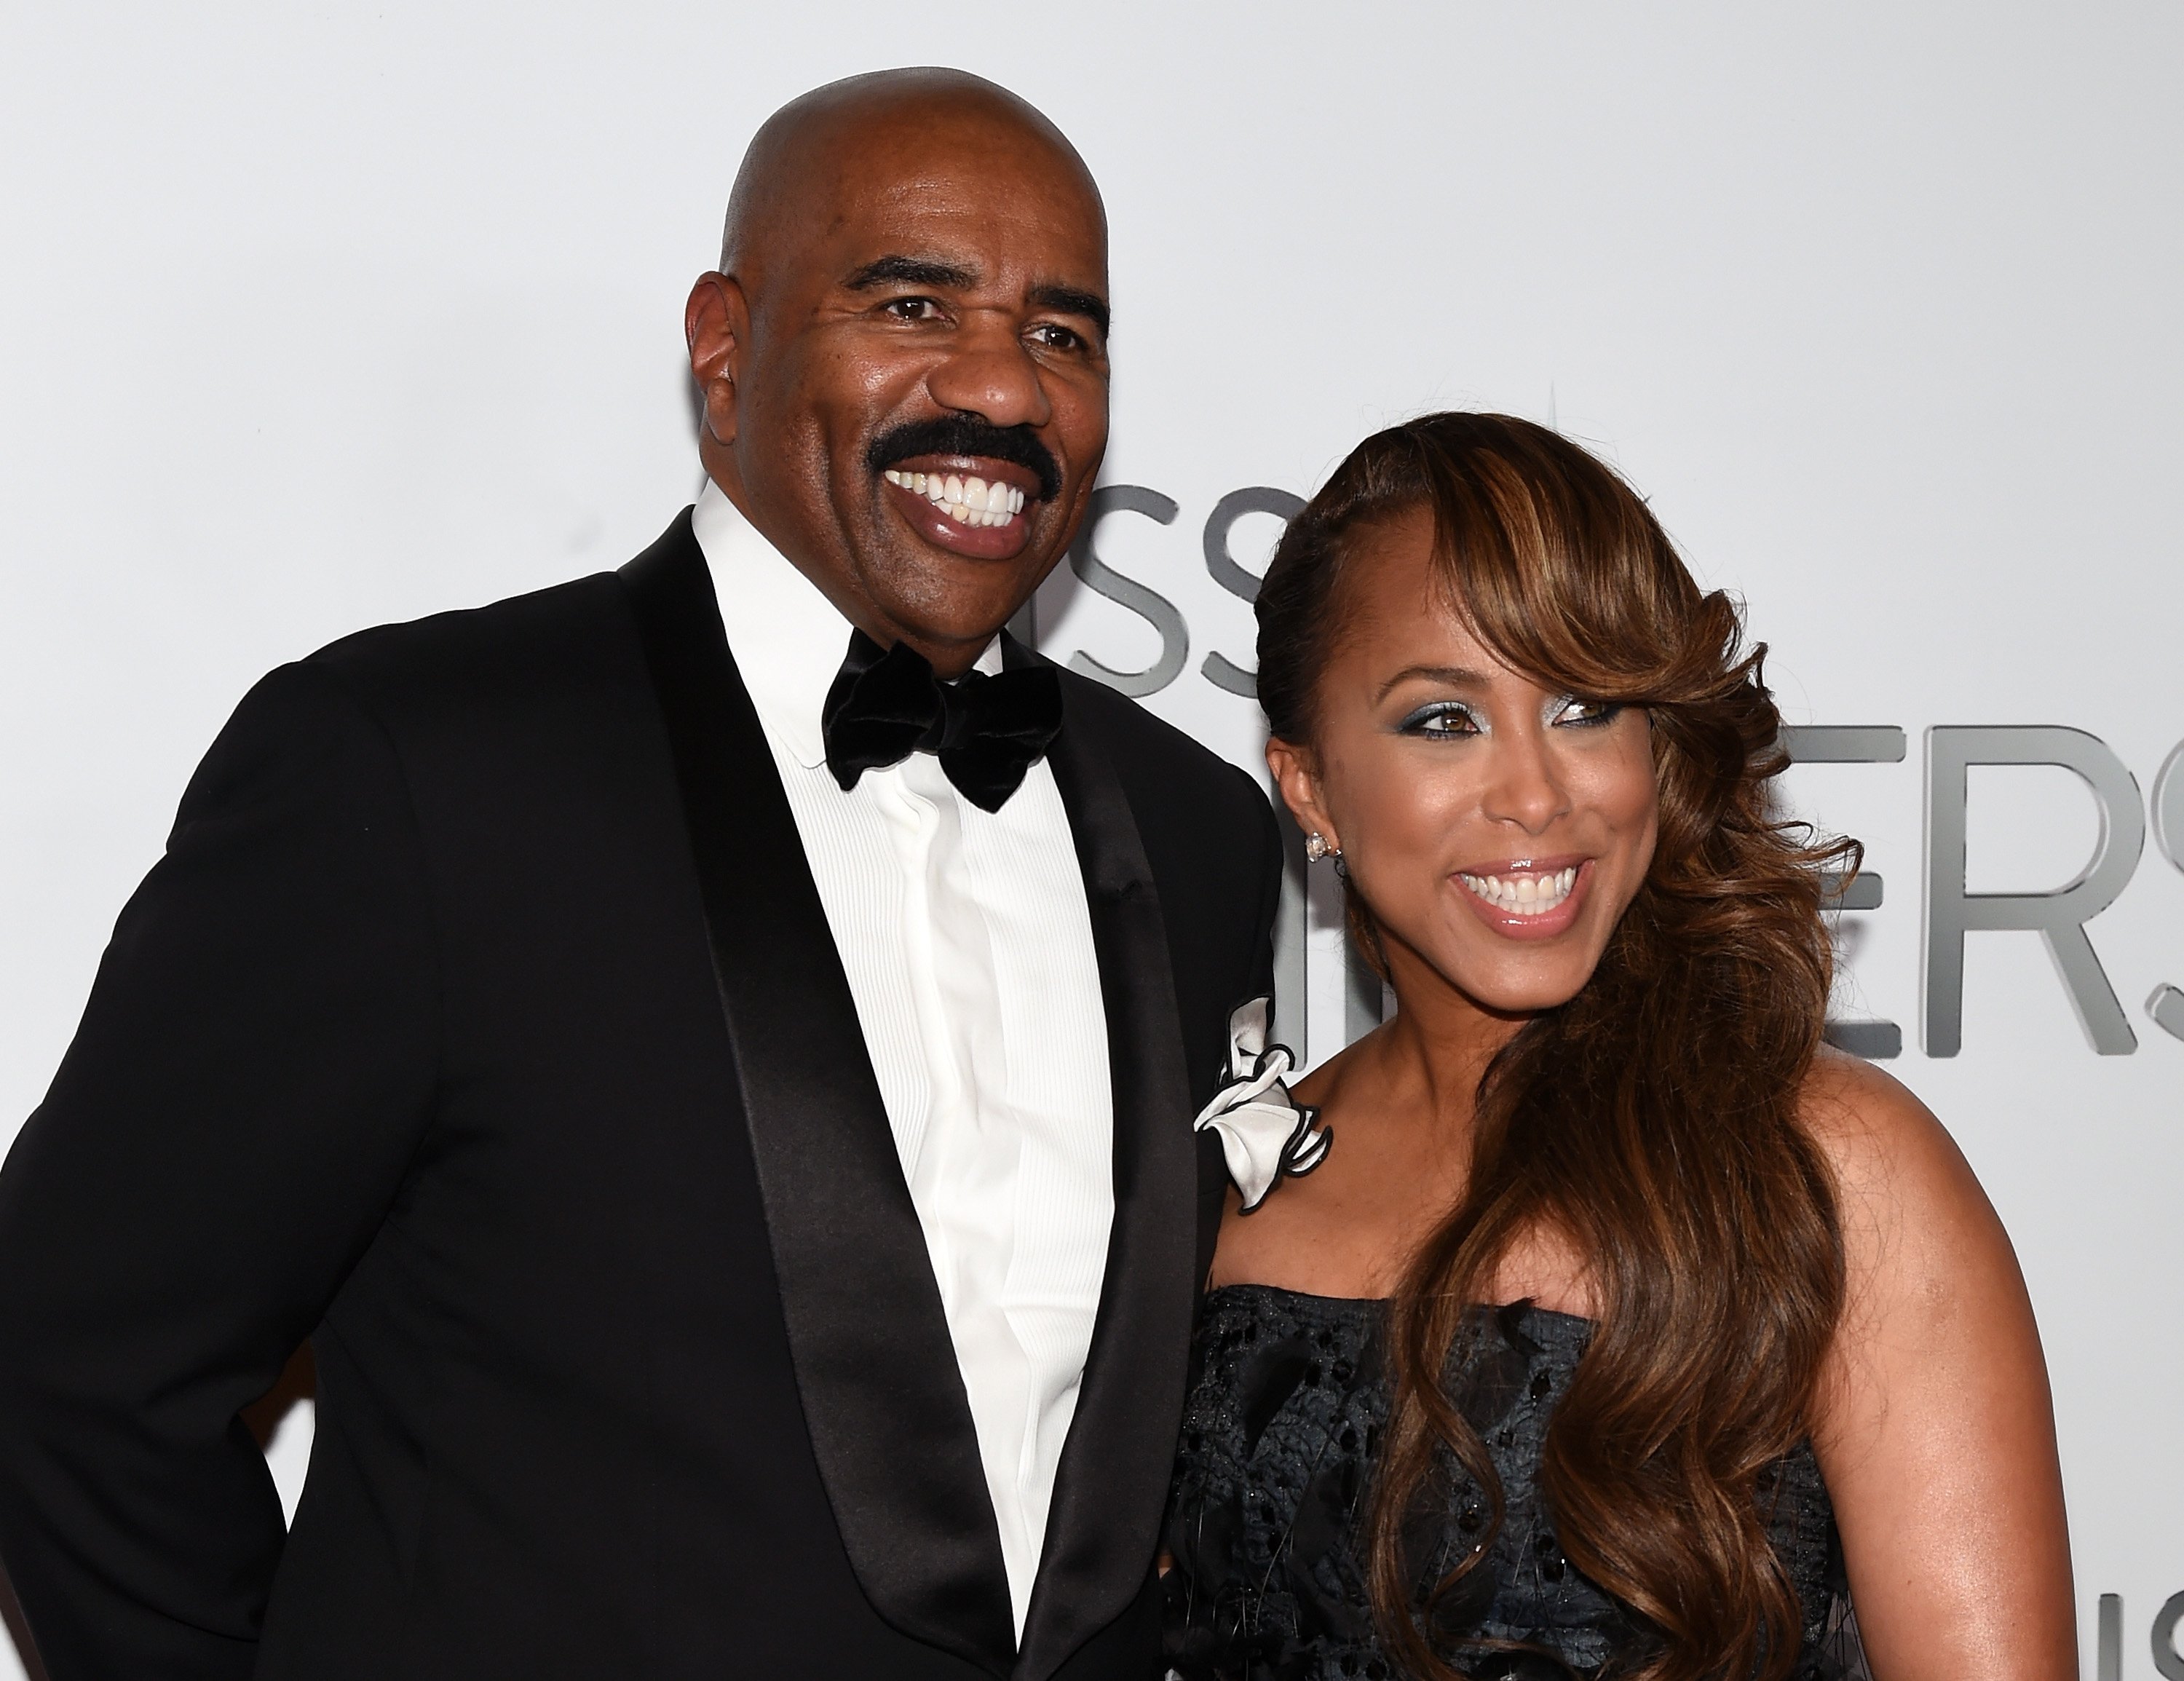 Steve and Marjorie Harvey attend the Miss Universe Pageant in Las Vegas, Nevada on December 20, 2015 | Photo: Getty Images